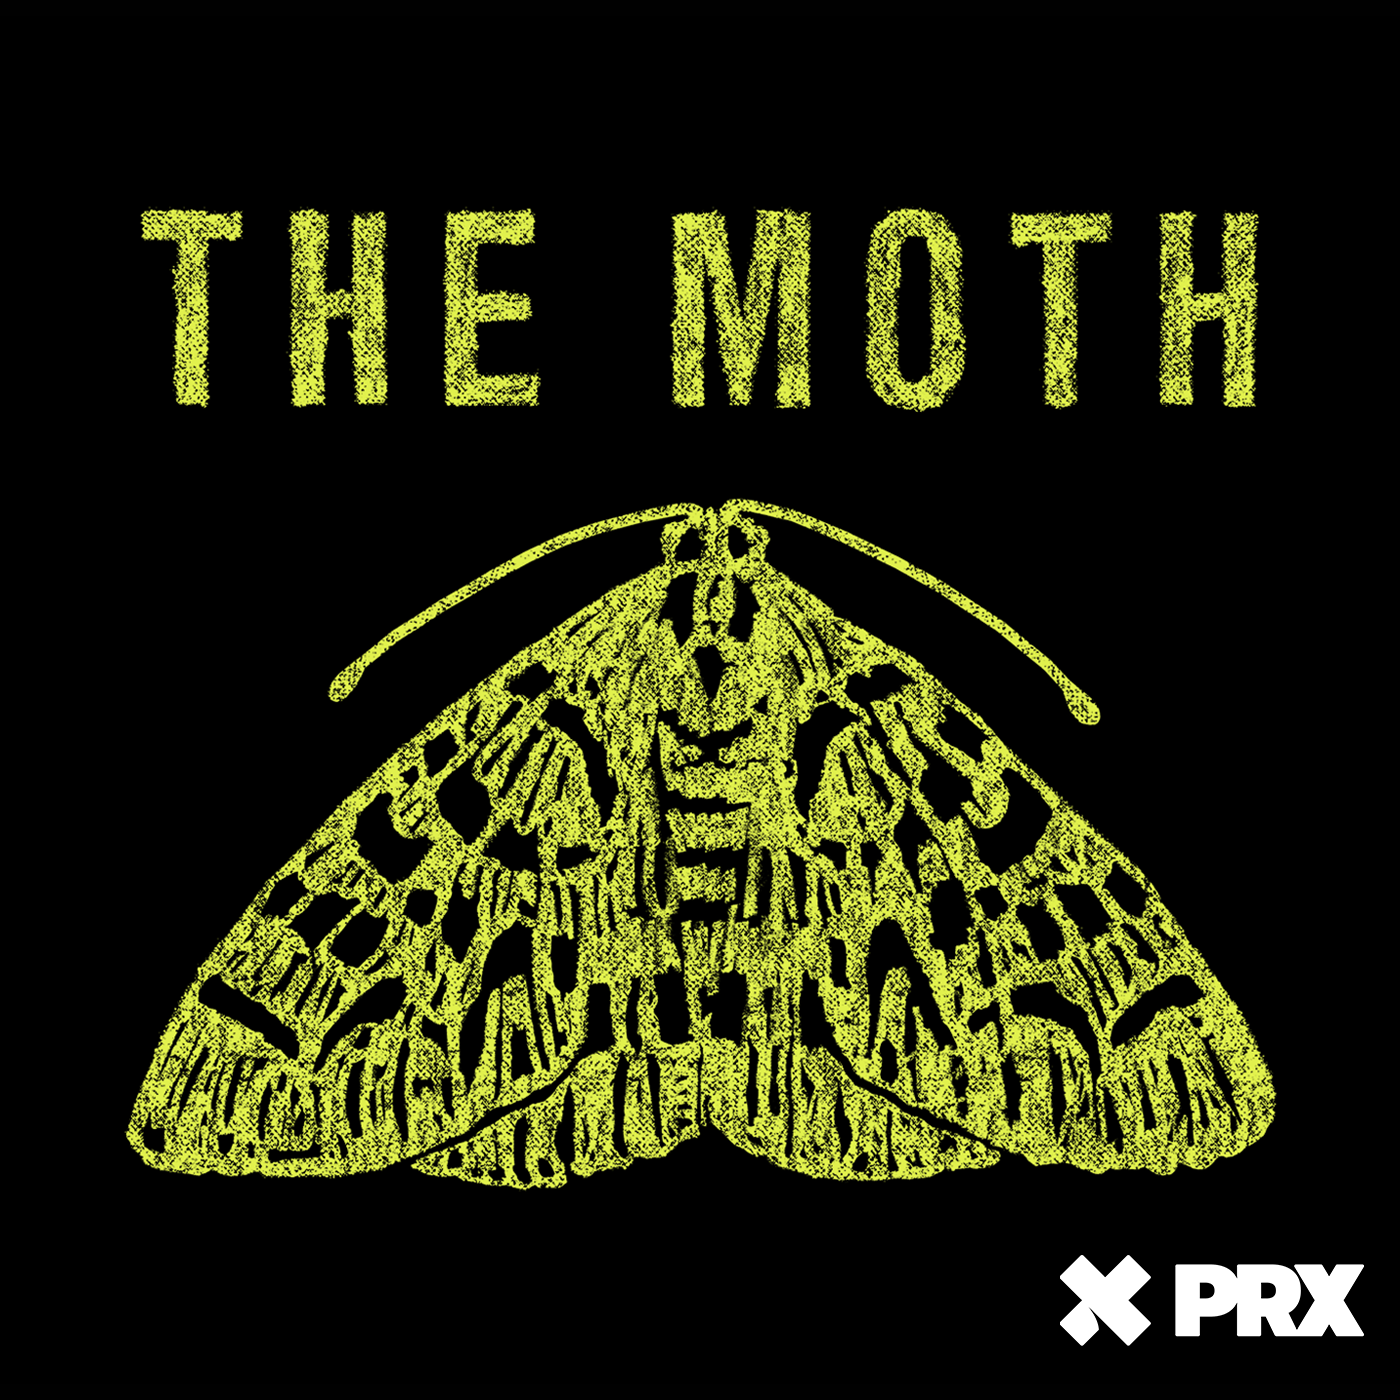 The Moth Radio Hour: Can't Help Falling in Love